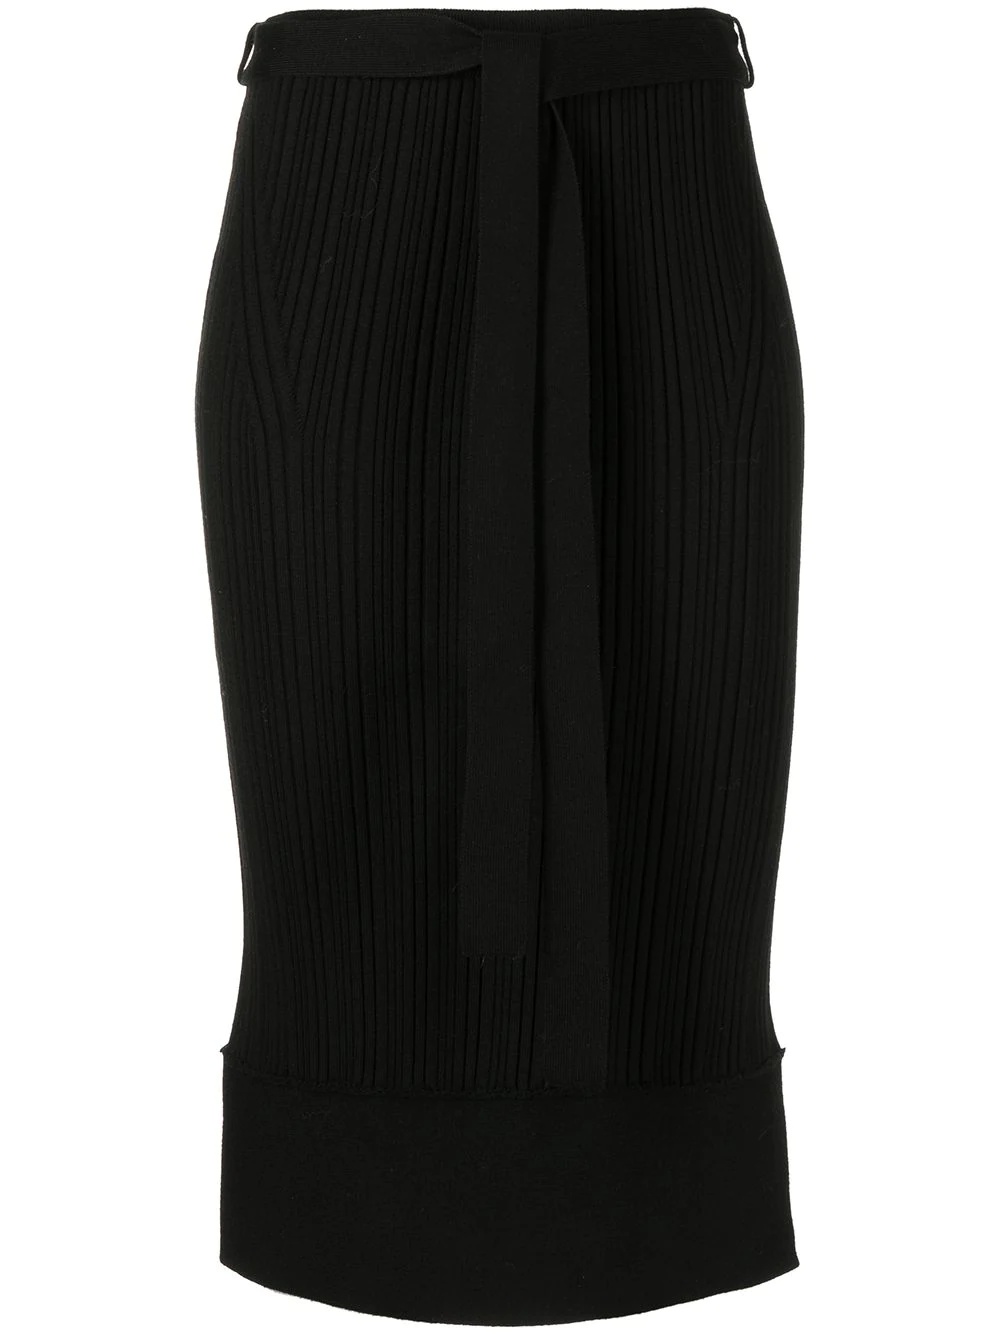 ribbed-knit tied-waist skirt - 1